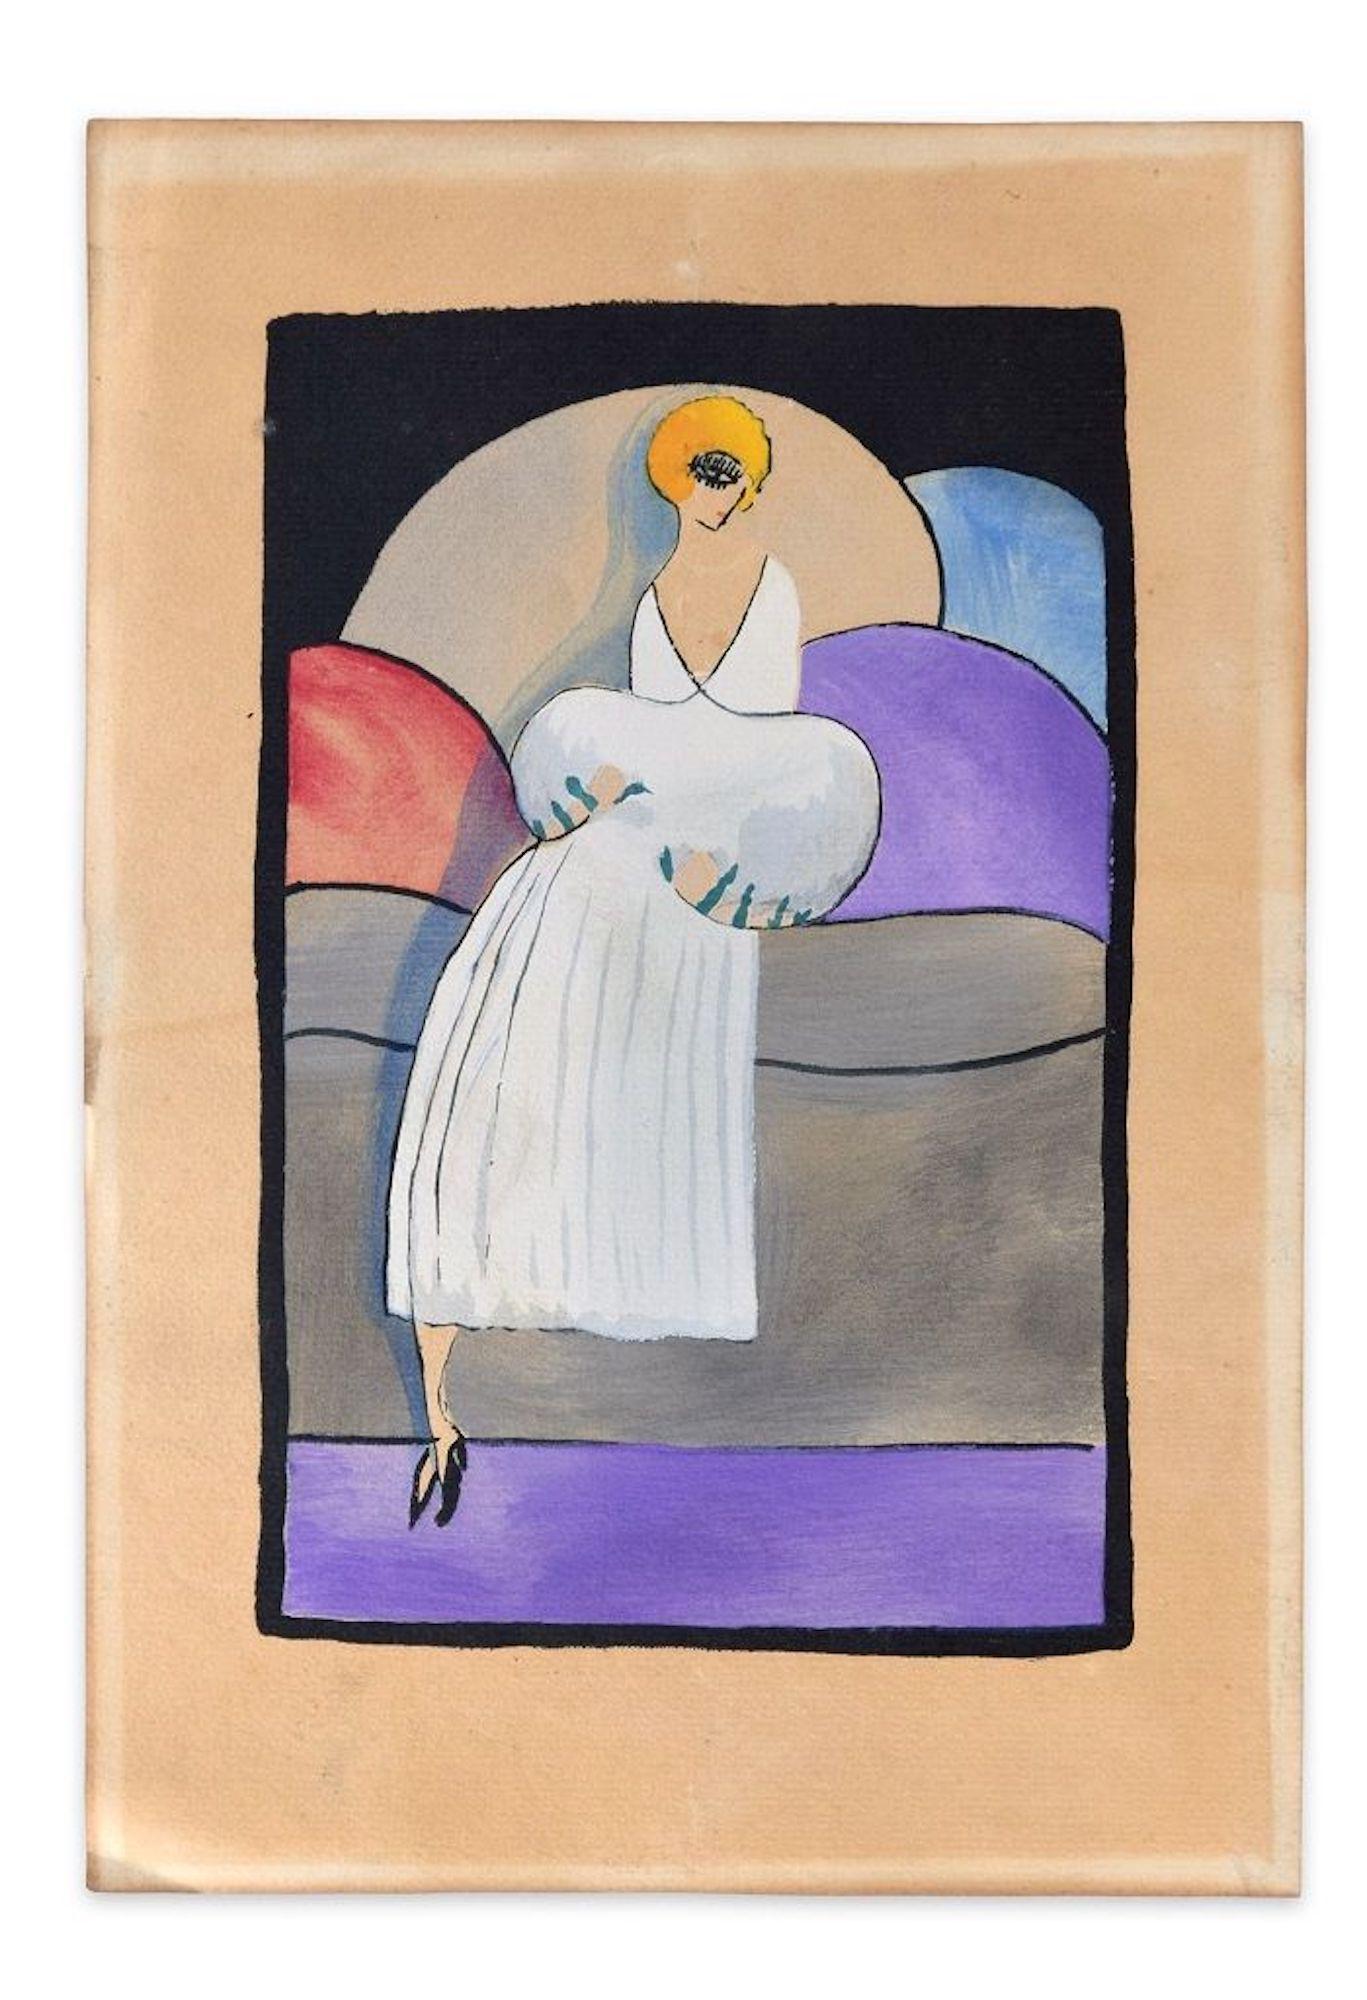 Woman in White / Woodcut Hand Colored in Tempera on Paper - Art Deco - 1920s - Print by Unknown